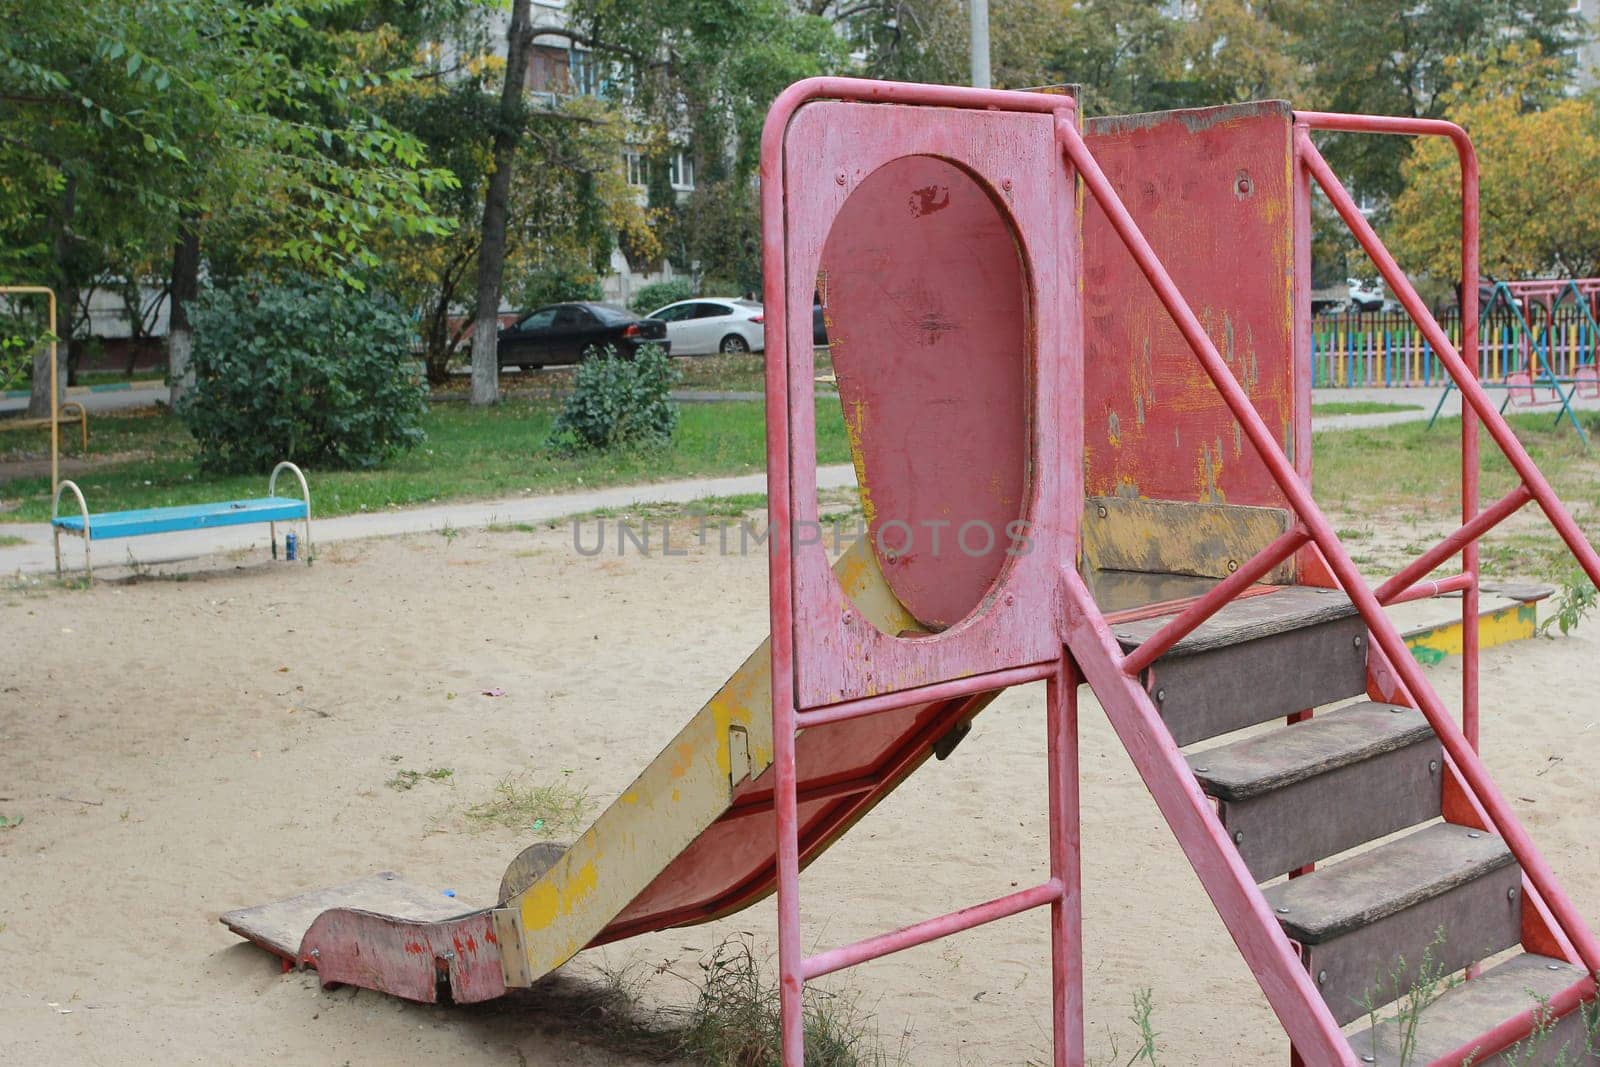 An old playground with a pink metal slide . Sand covering of the playground.